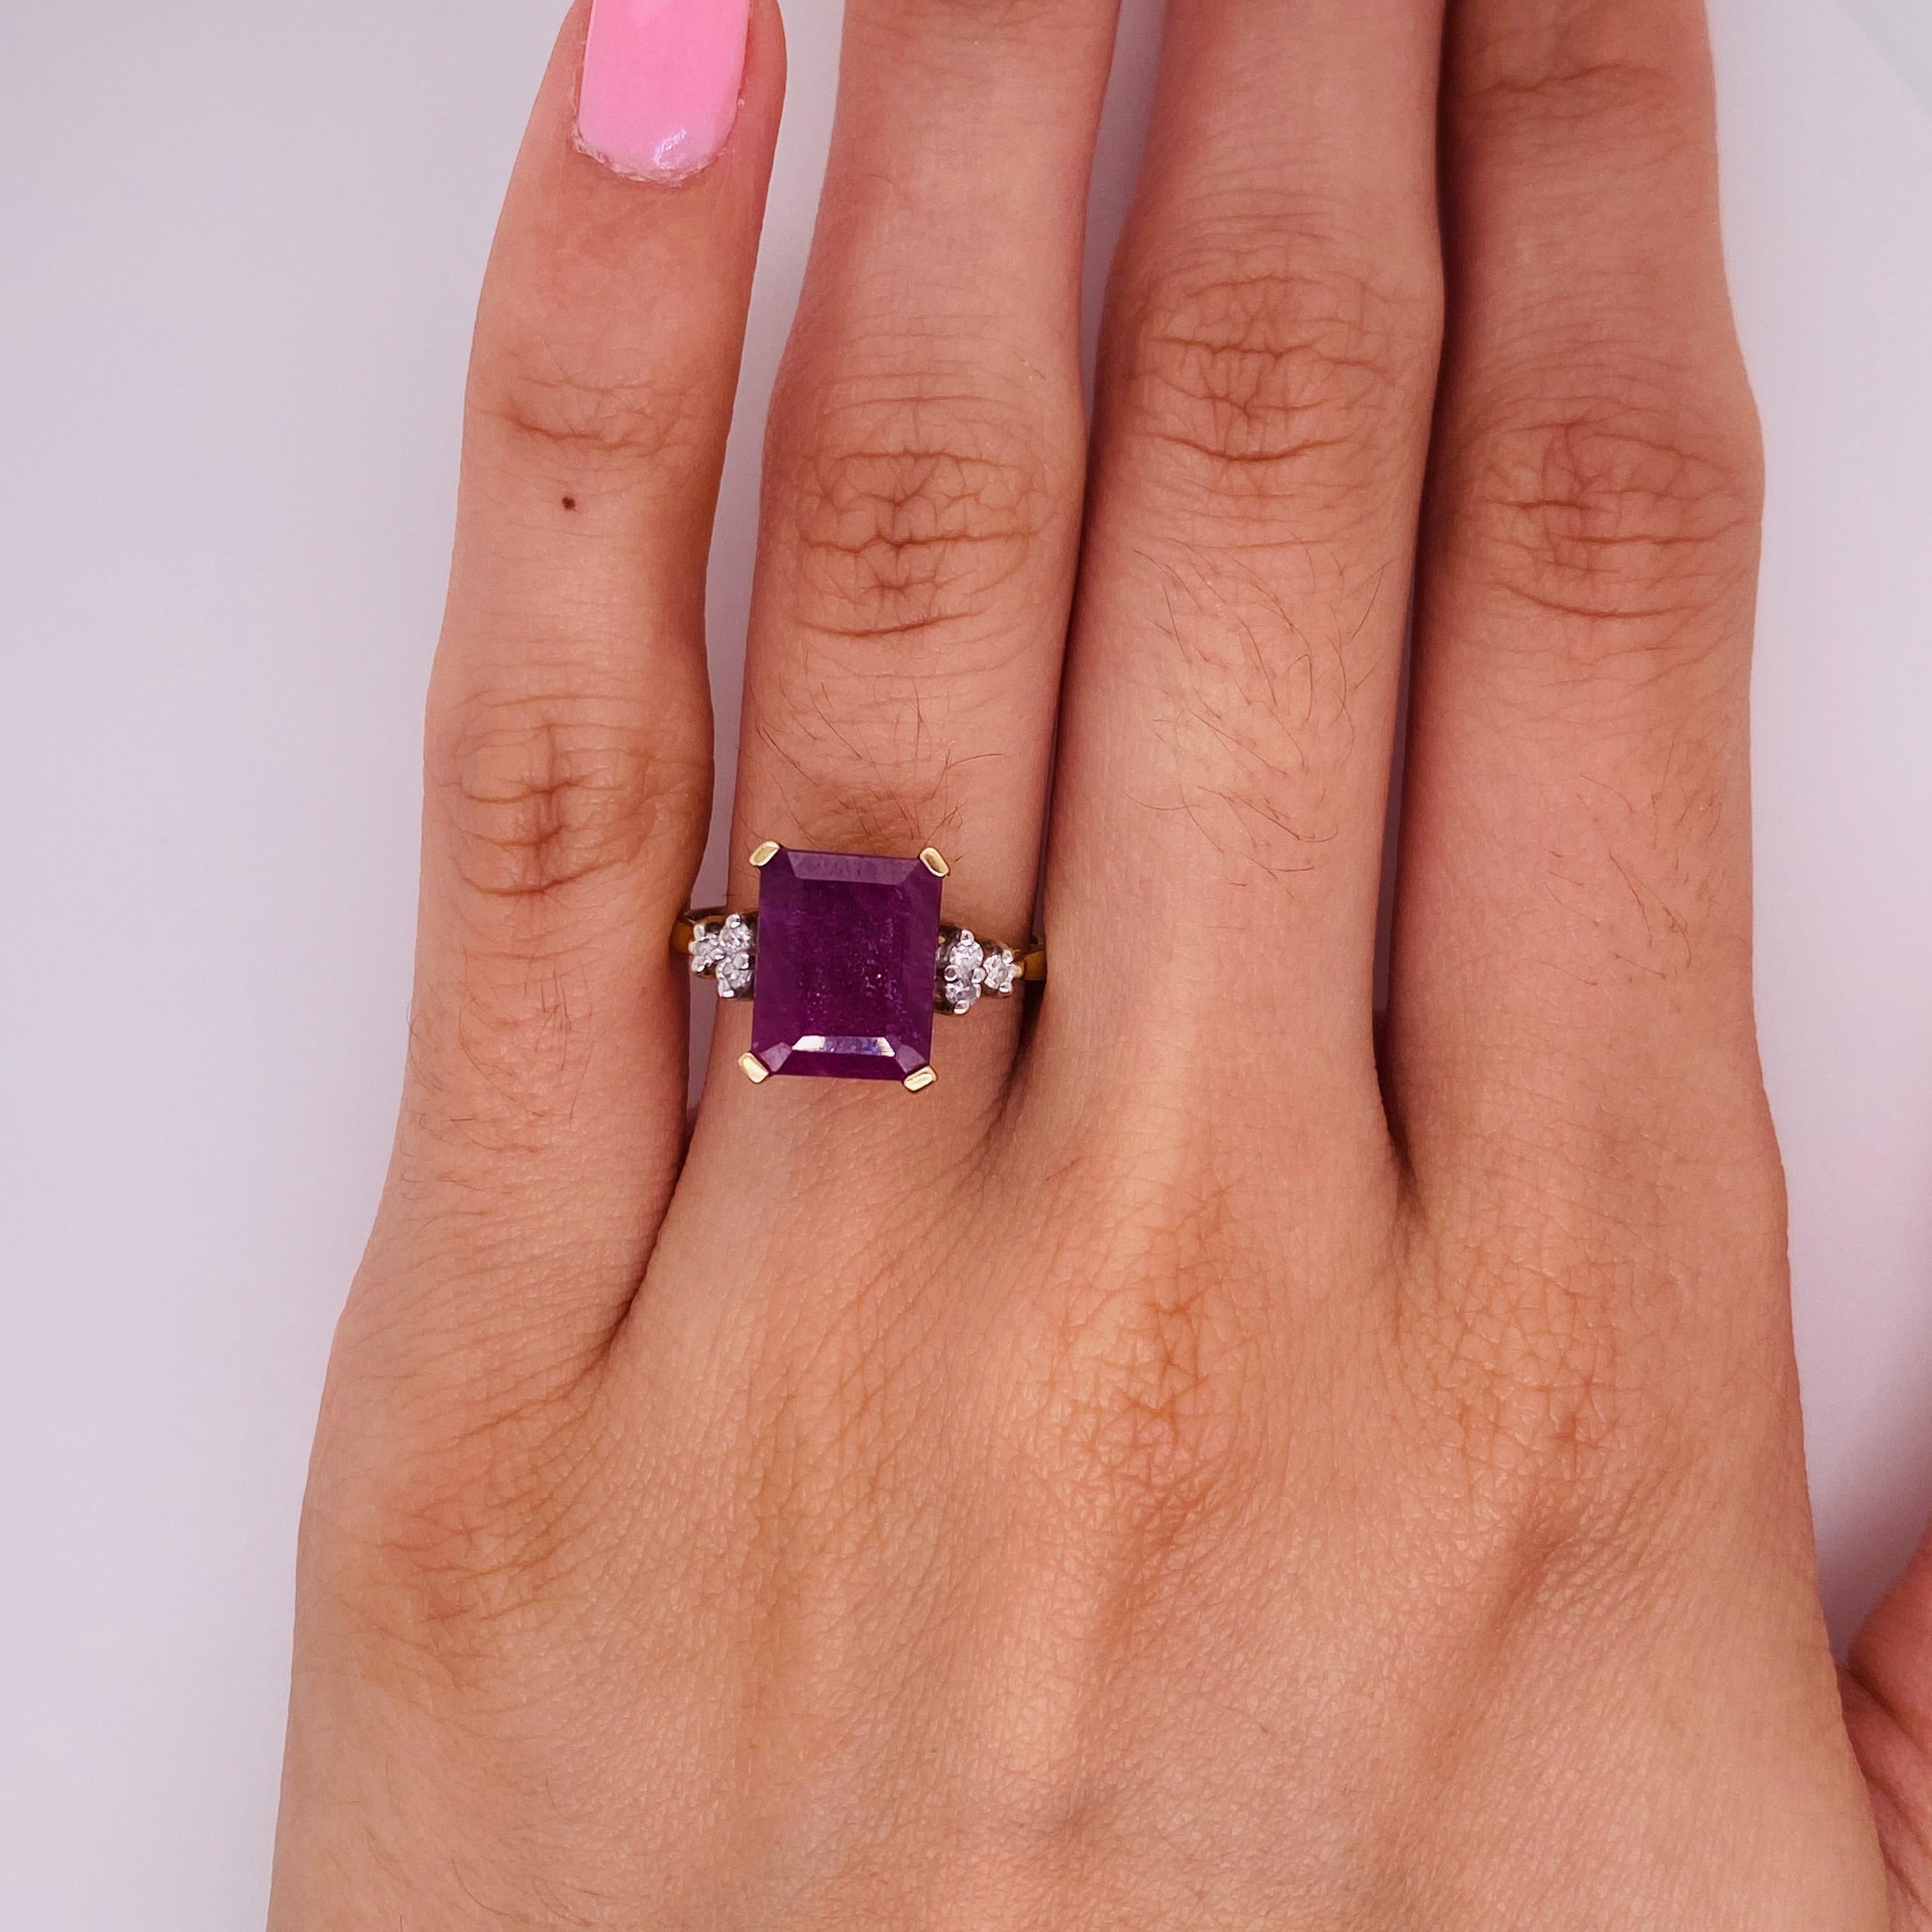 Who do you know that loves deep purple-red rubies? You or someone you love? We have this beauty on sale from the original price of $2,000. This graceful ruby has a hint of the shape that a natural hexagonal ruby crystal grows in. Take a break from